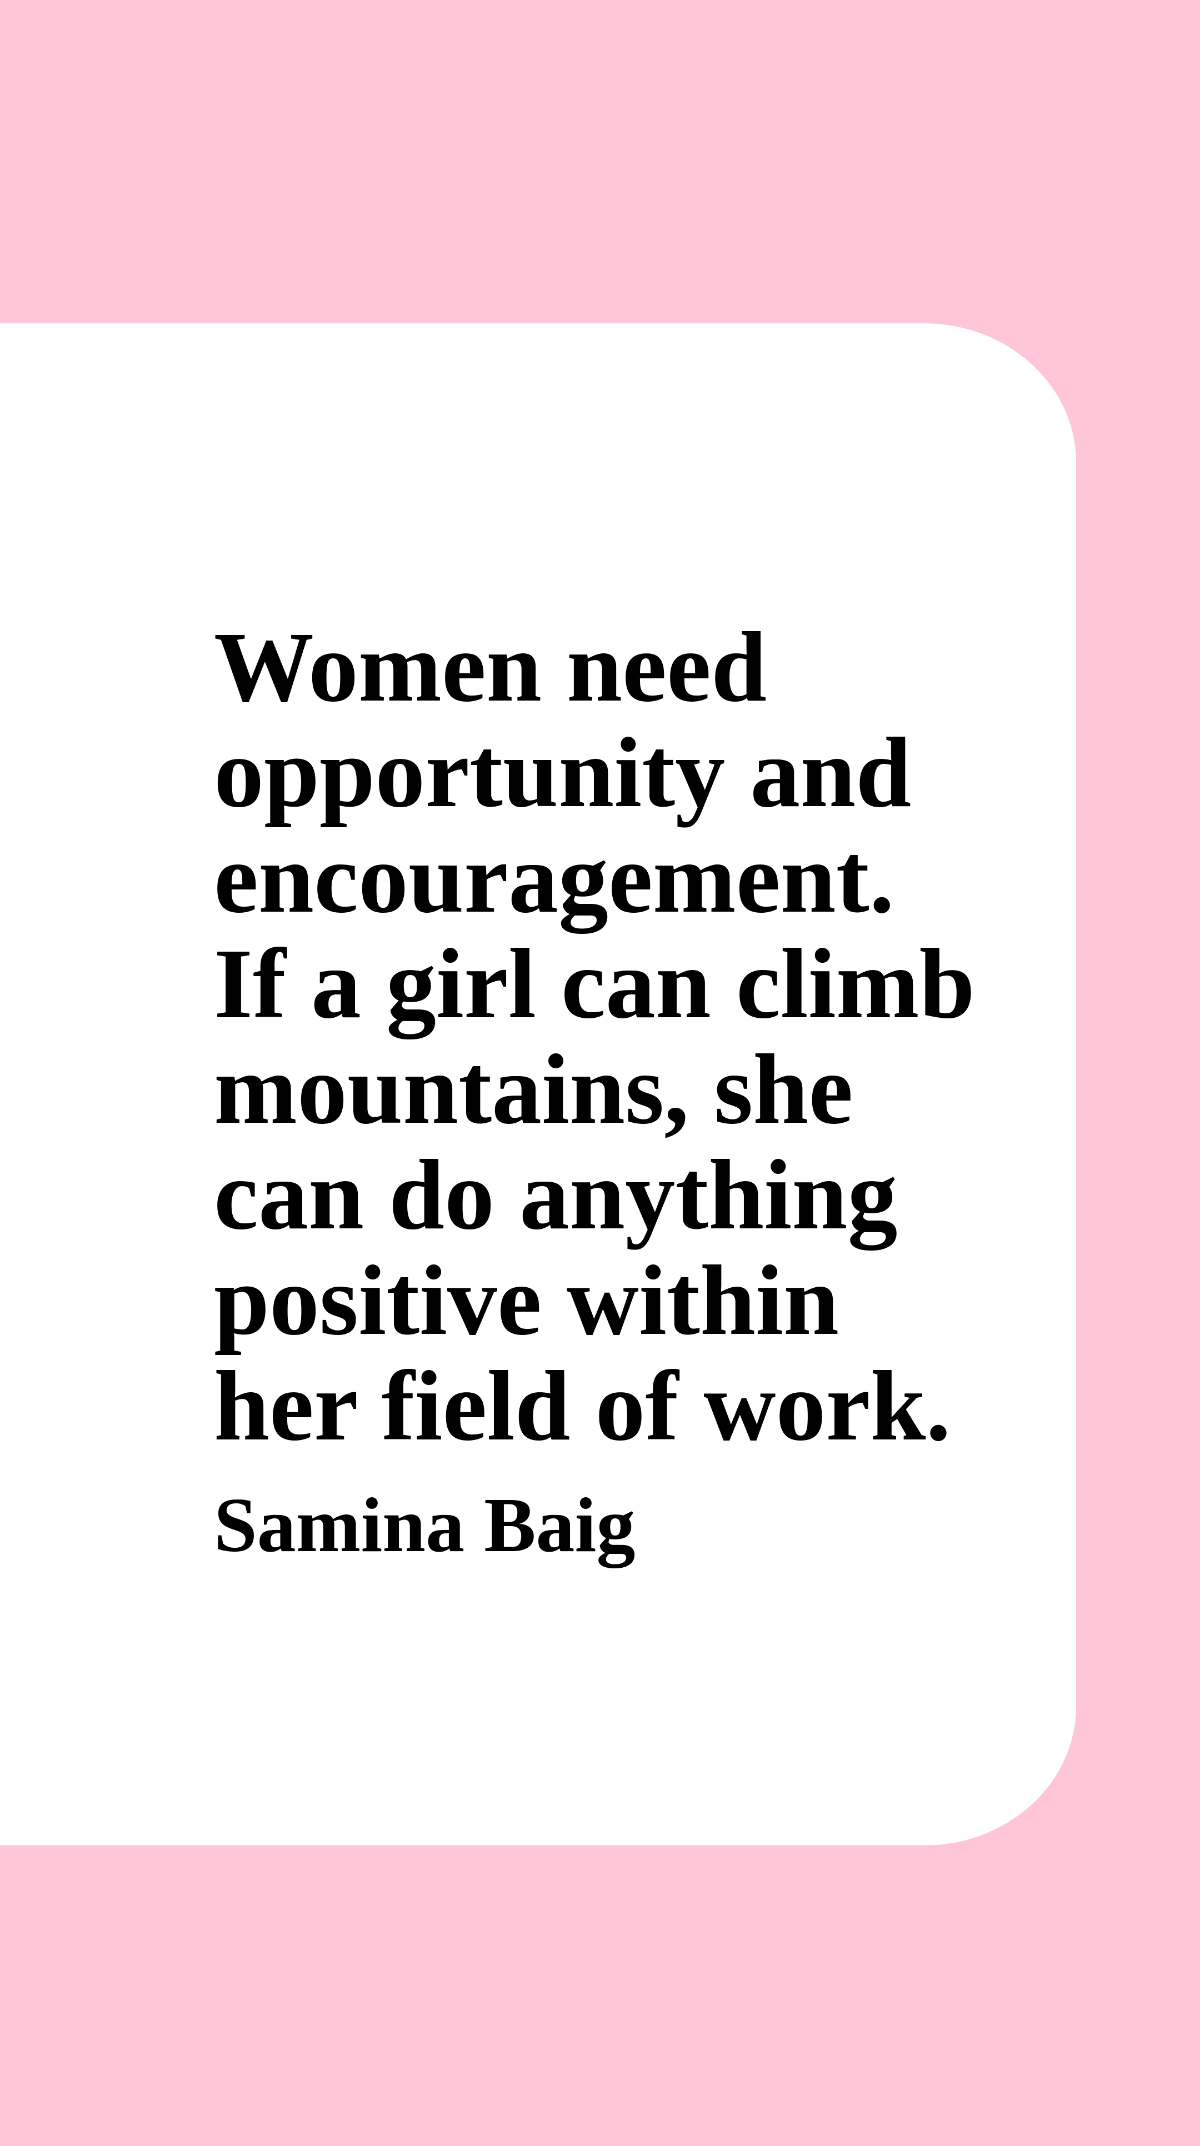 Samina Baig - Women need opportunity and encouragement. If a girl can climb mountains, she can do anything positive within her field of work. Template